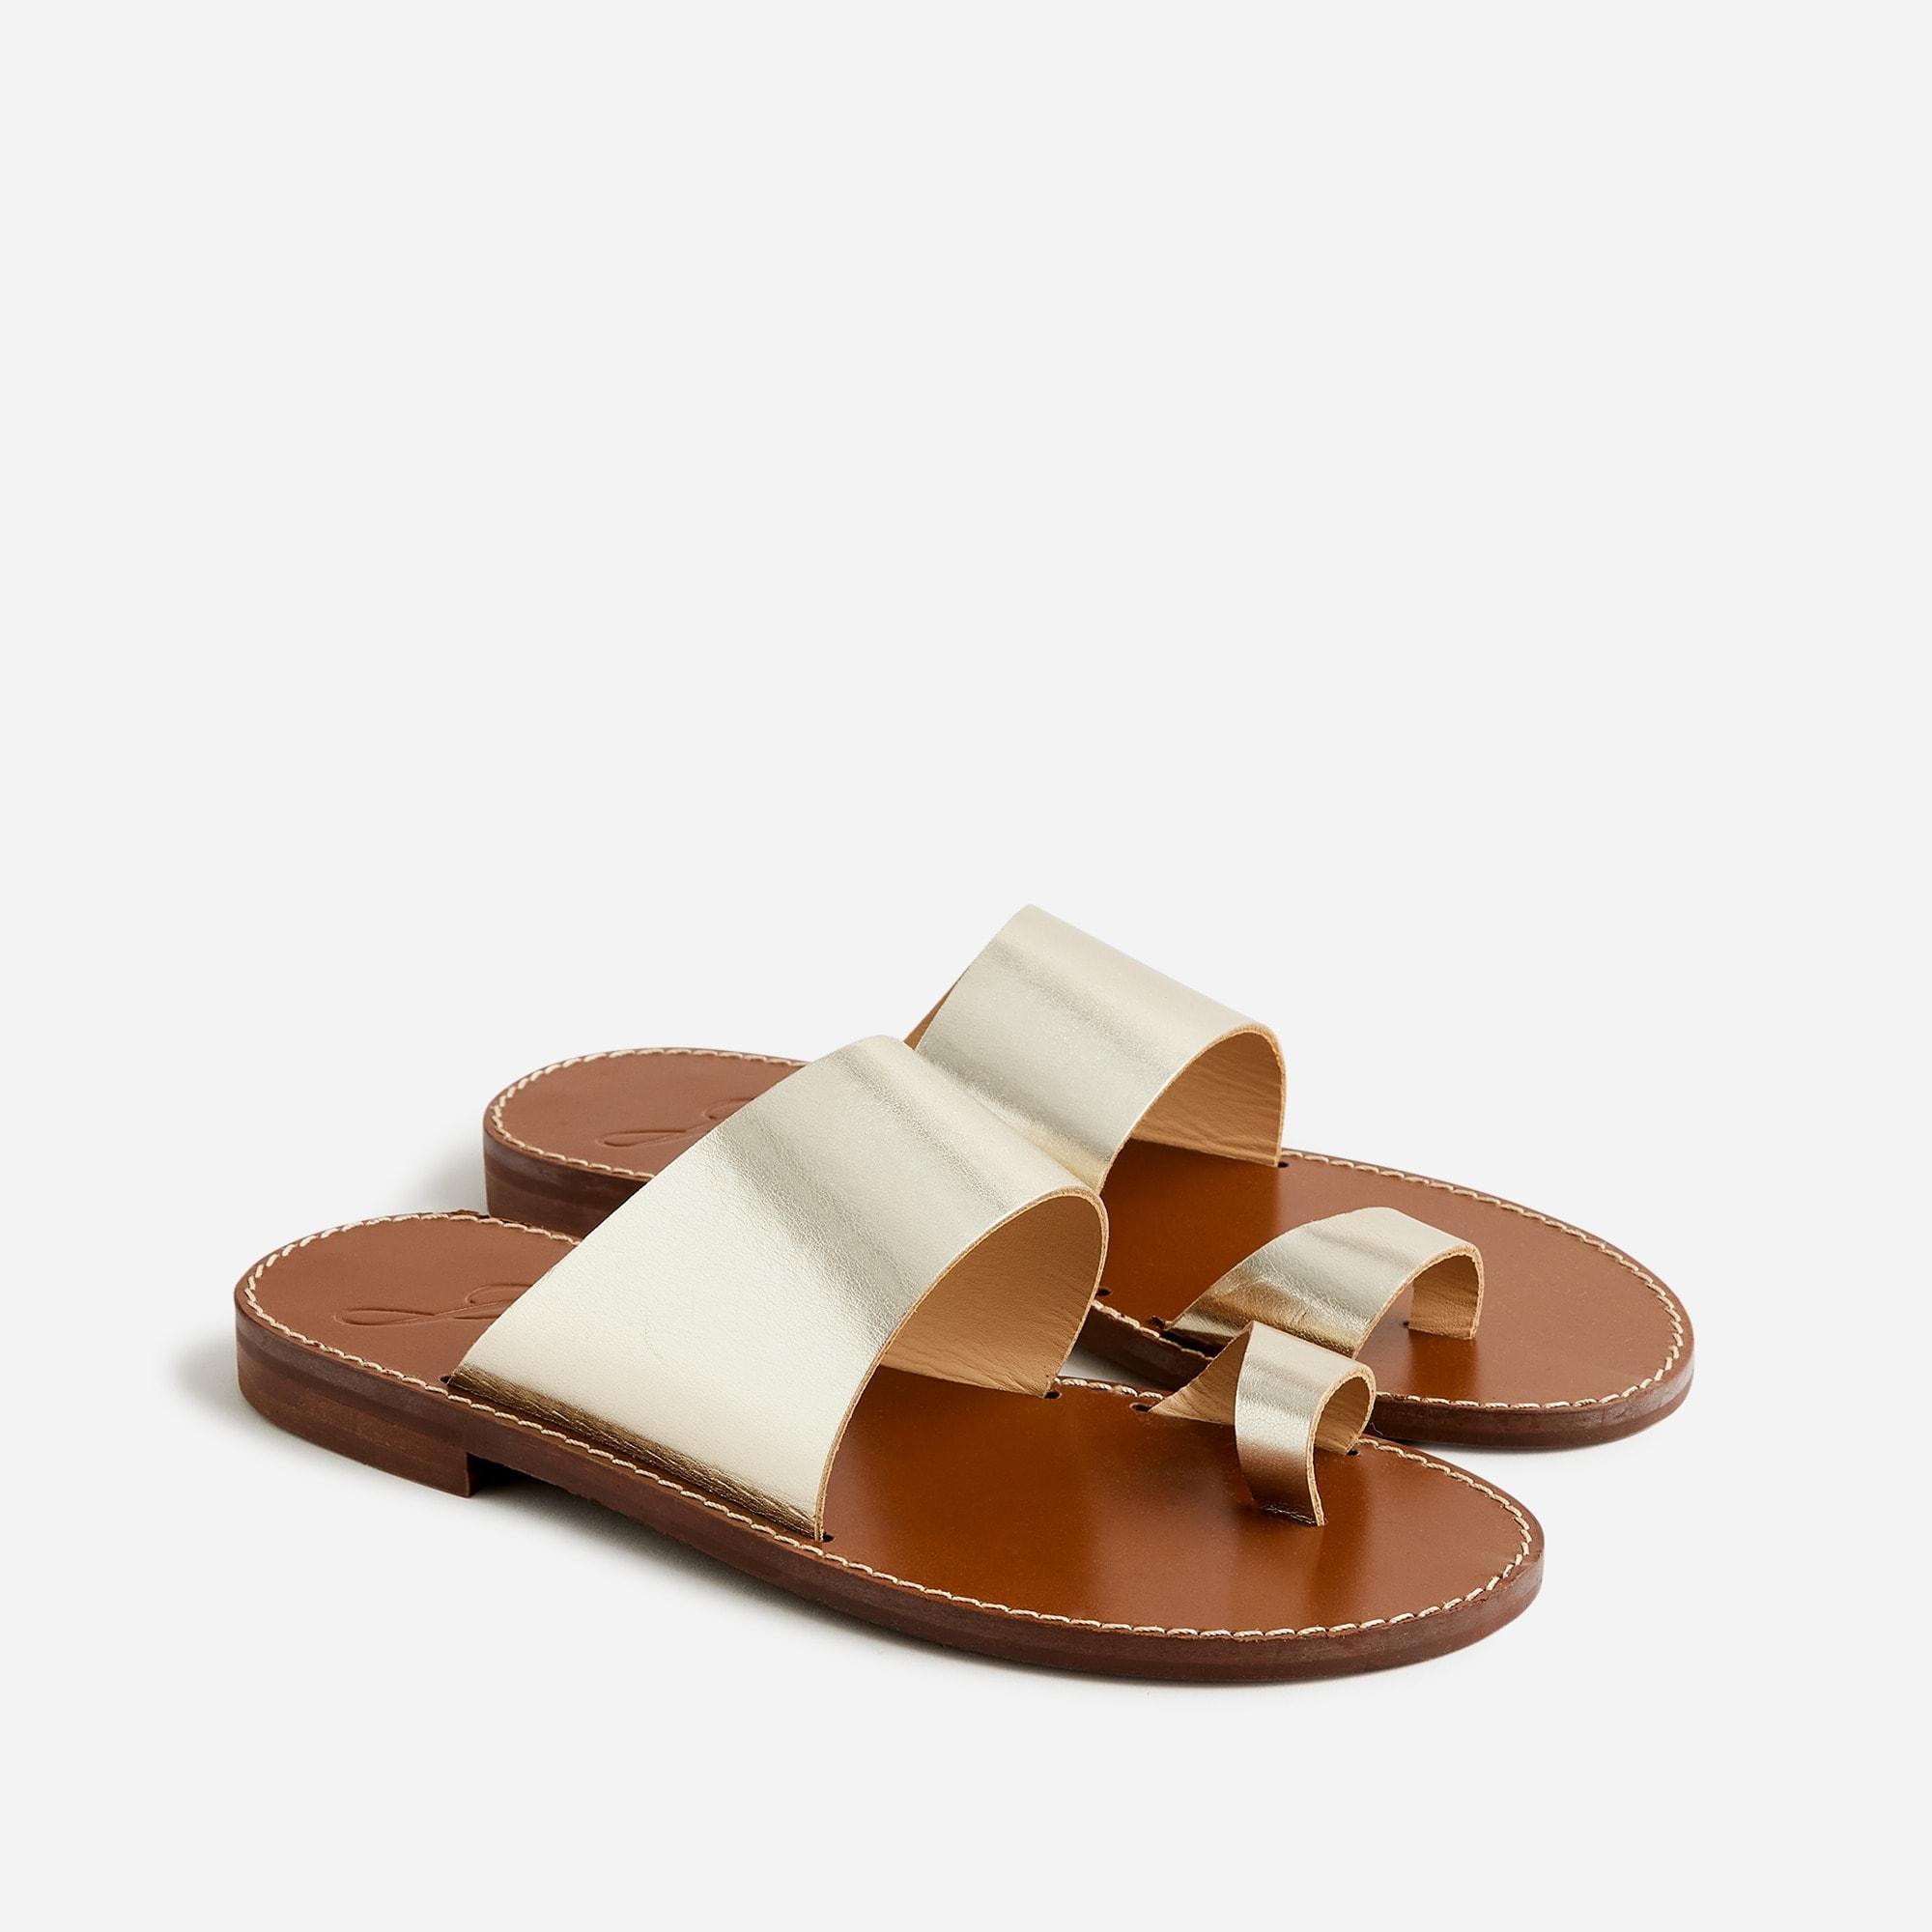 J.Crew Marta Made-in-italy Metallic Leather Sandals in Brown | Lyst